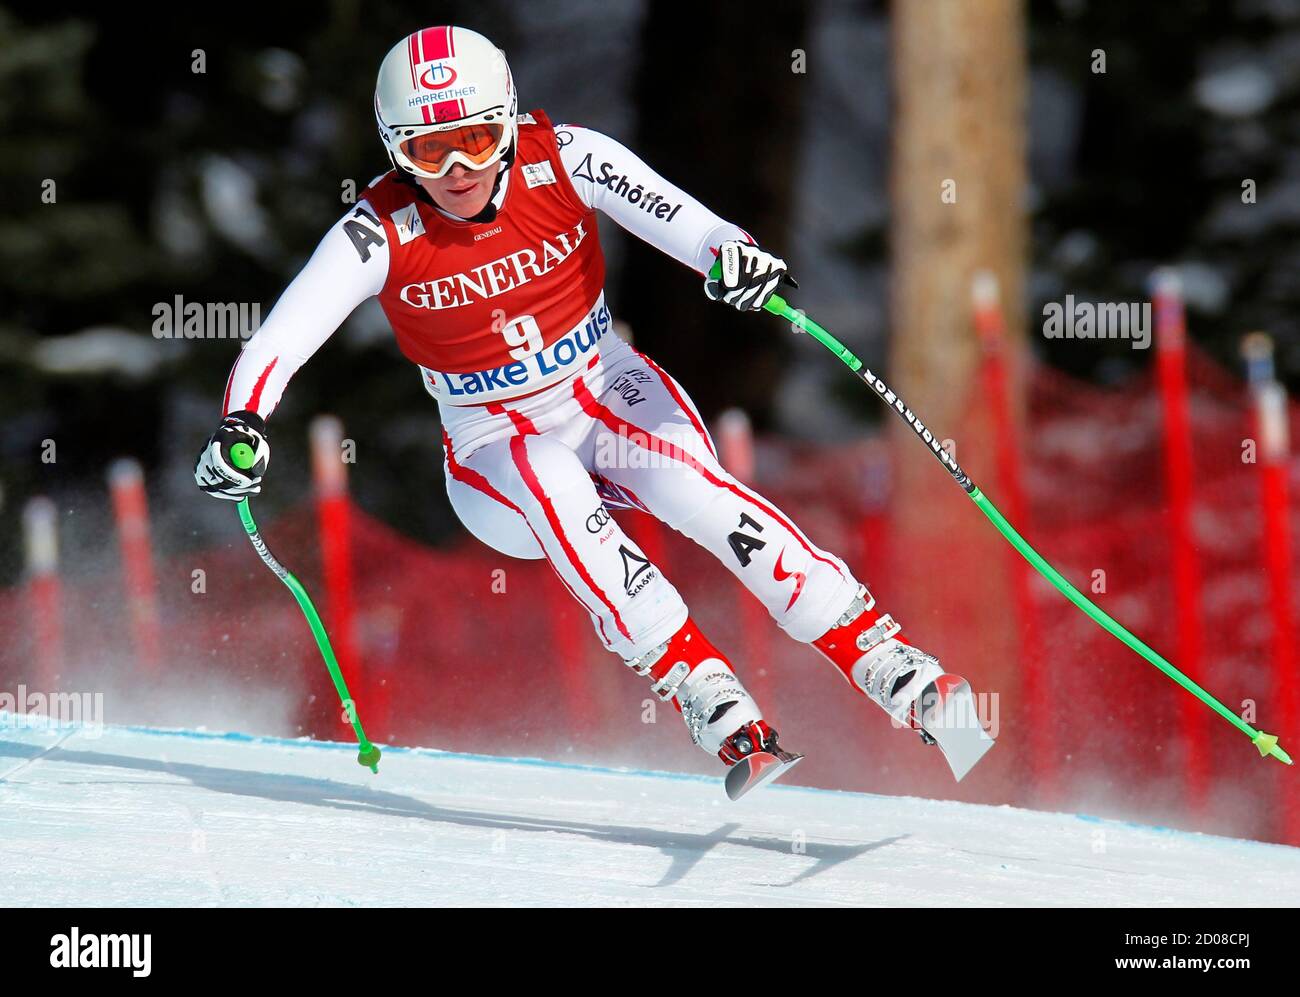 Andrea Fischbacher of Austria makes a turn during the Women's World Cup downhill alpine skiing race in Lake Louise, Alberta December 2, 2011.  REUTERS/Mike Blake   (CANADA - Tags: SPORT SKIING) Stock Photo